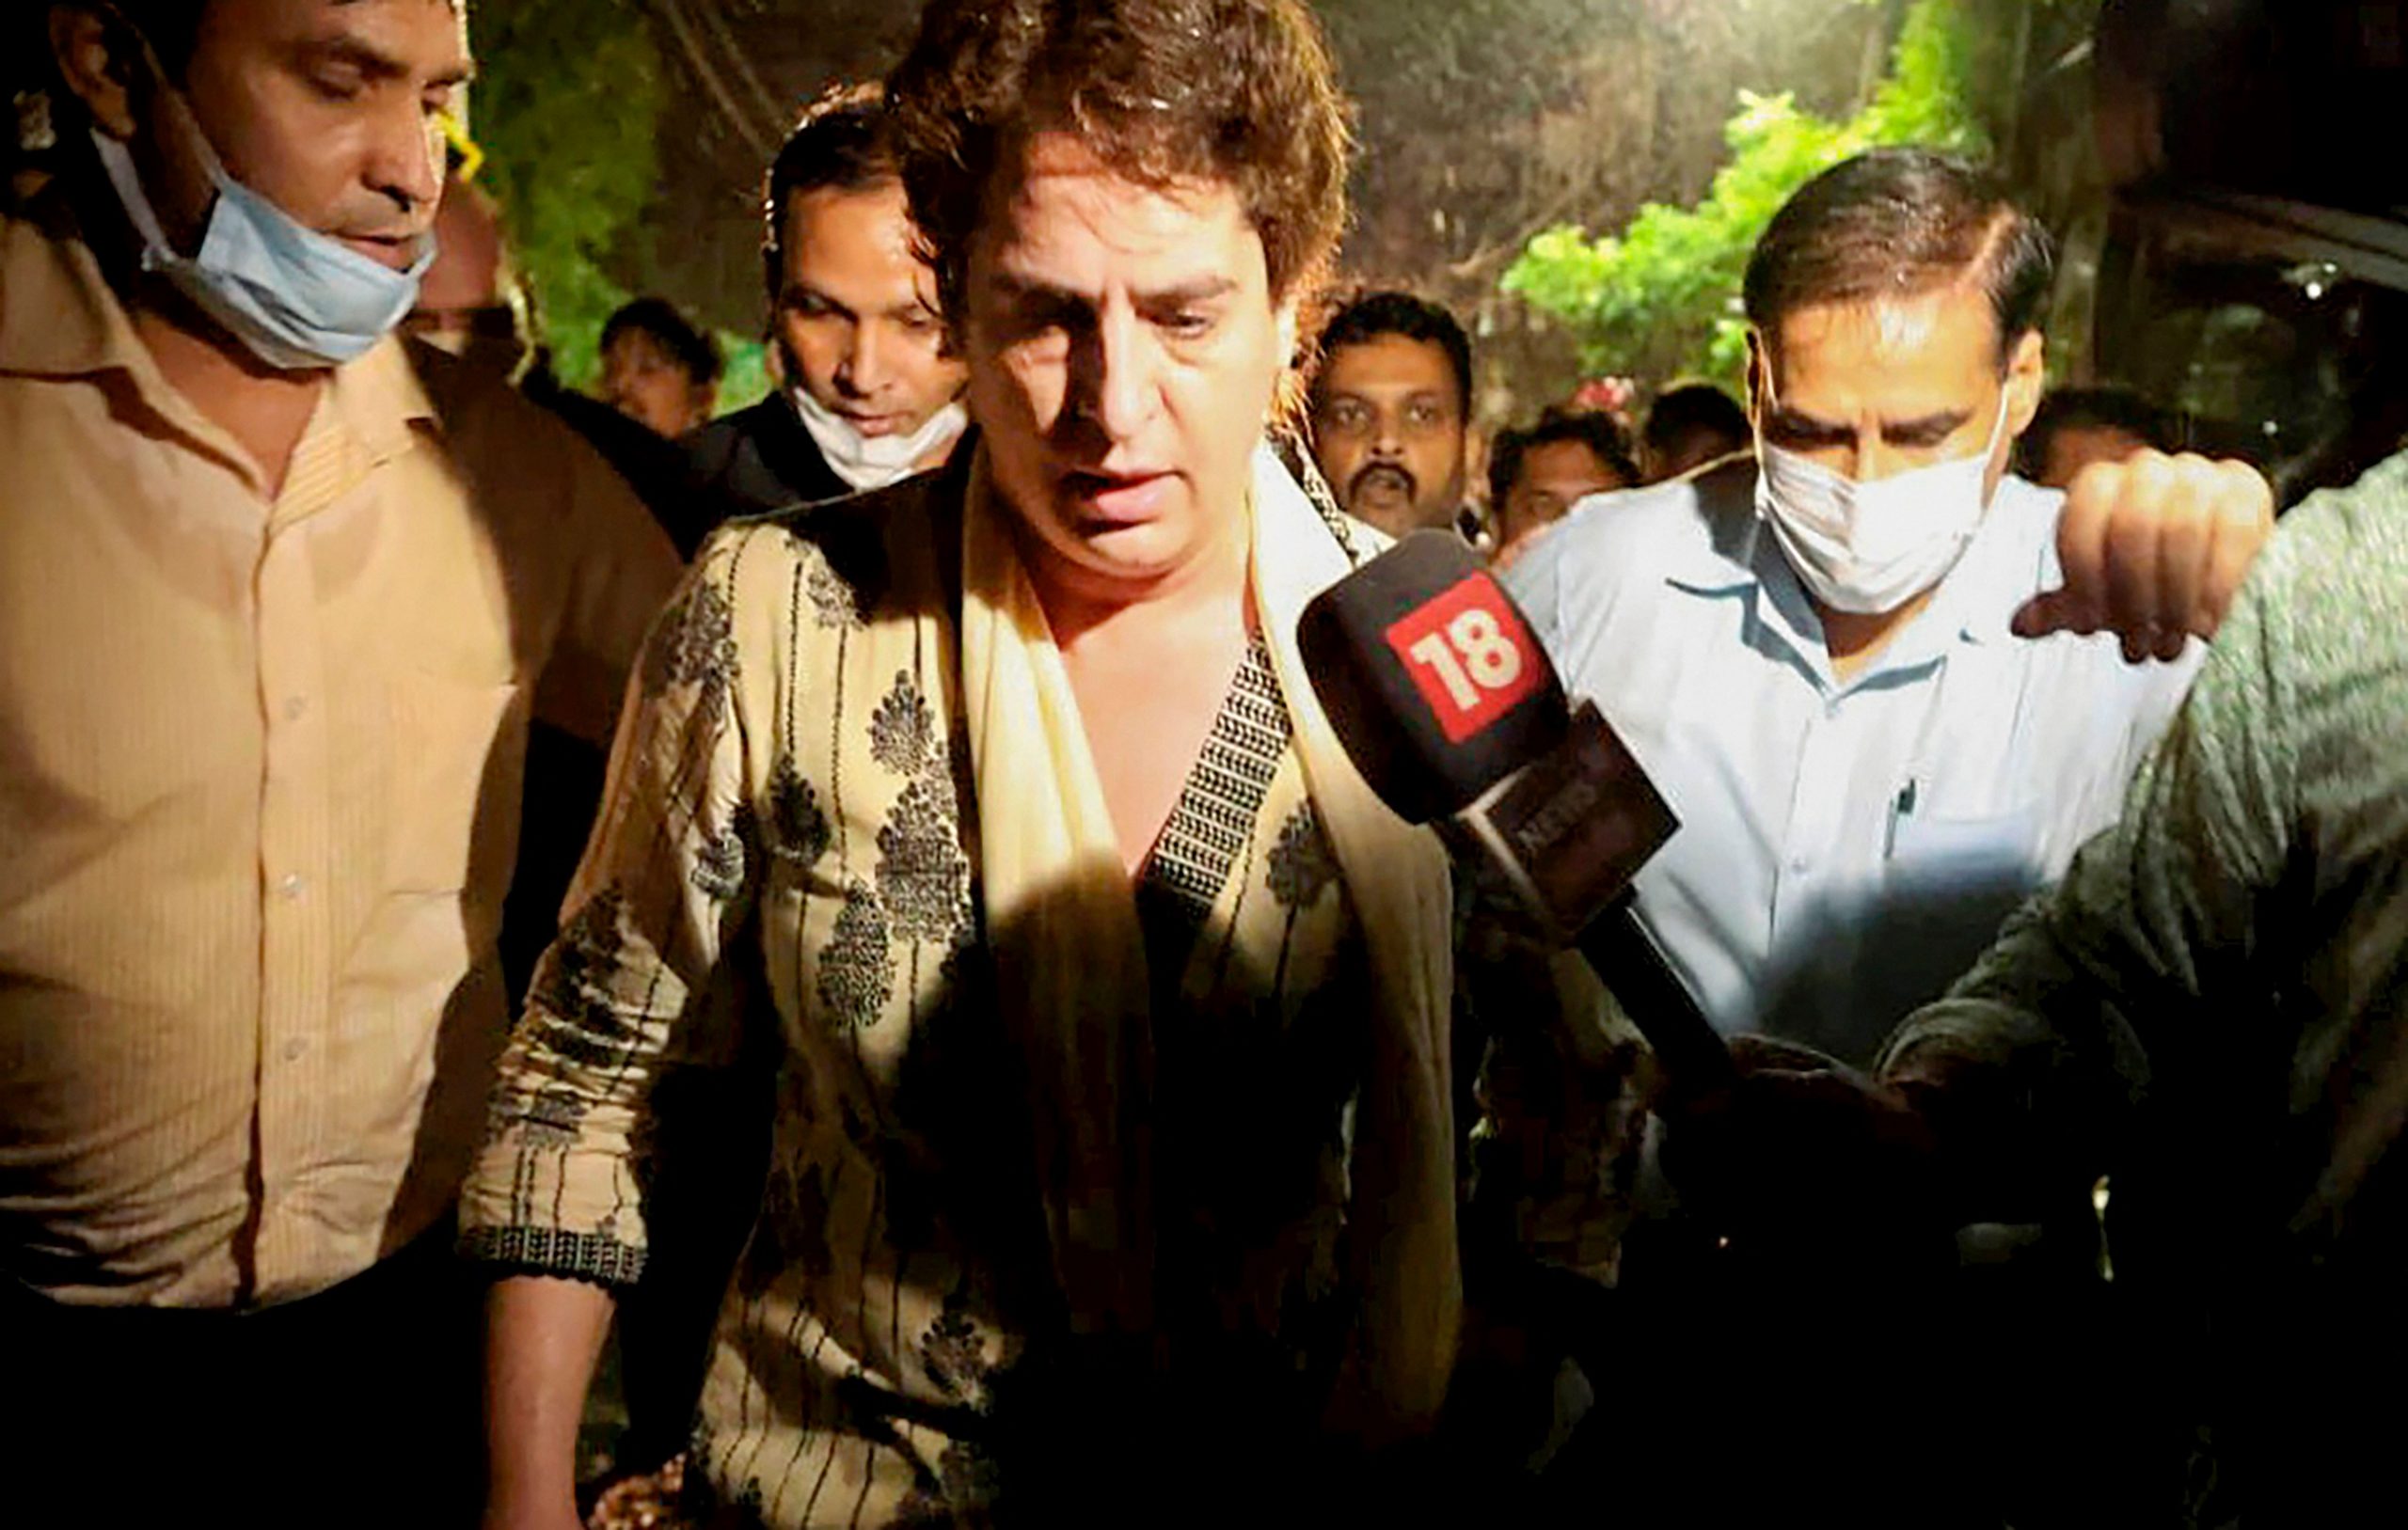 Priyanka Gandhi being monitored by drones in detention, says Congress